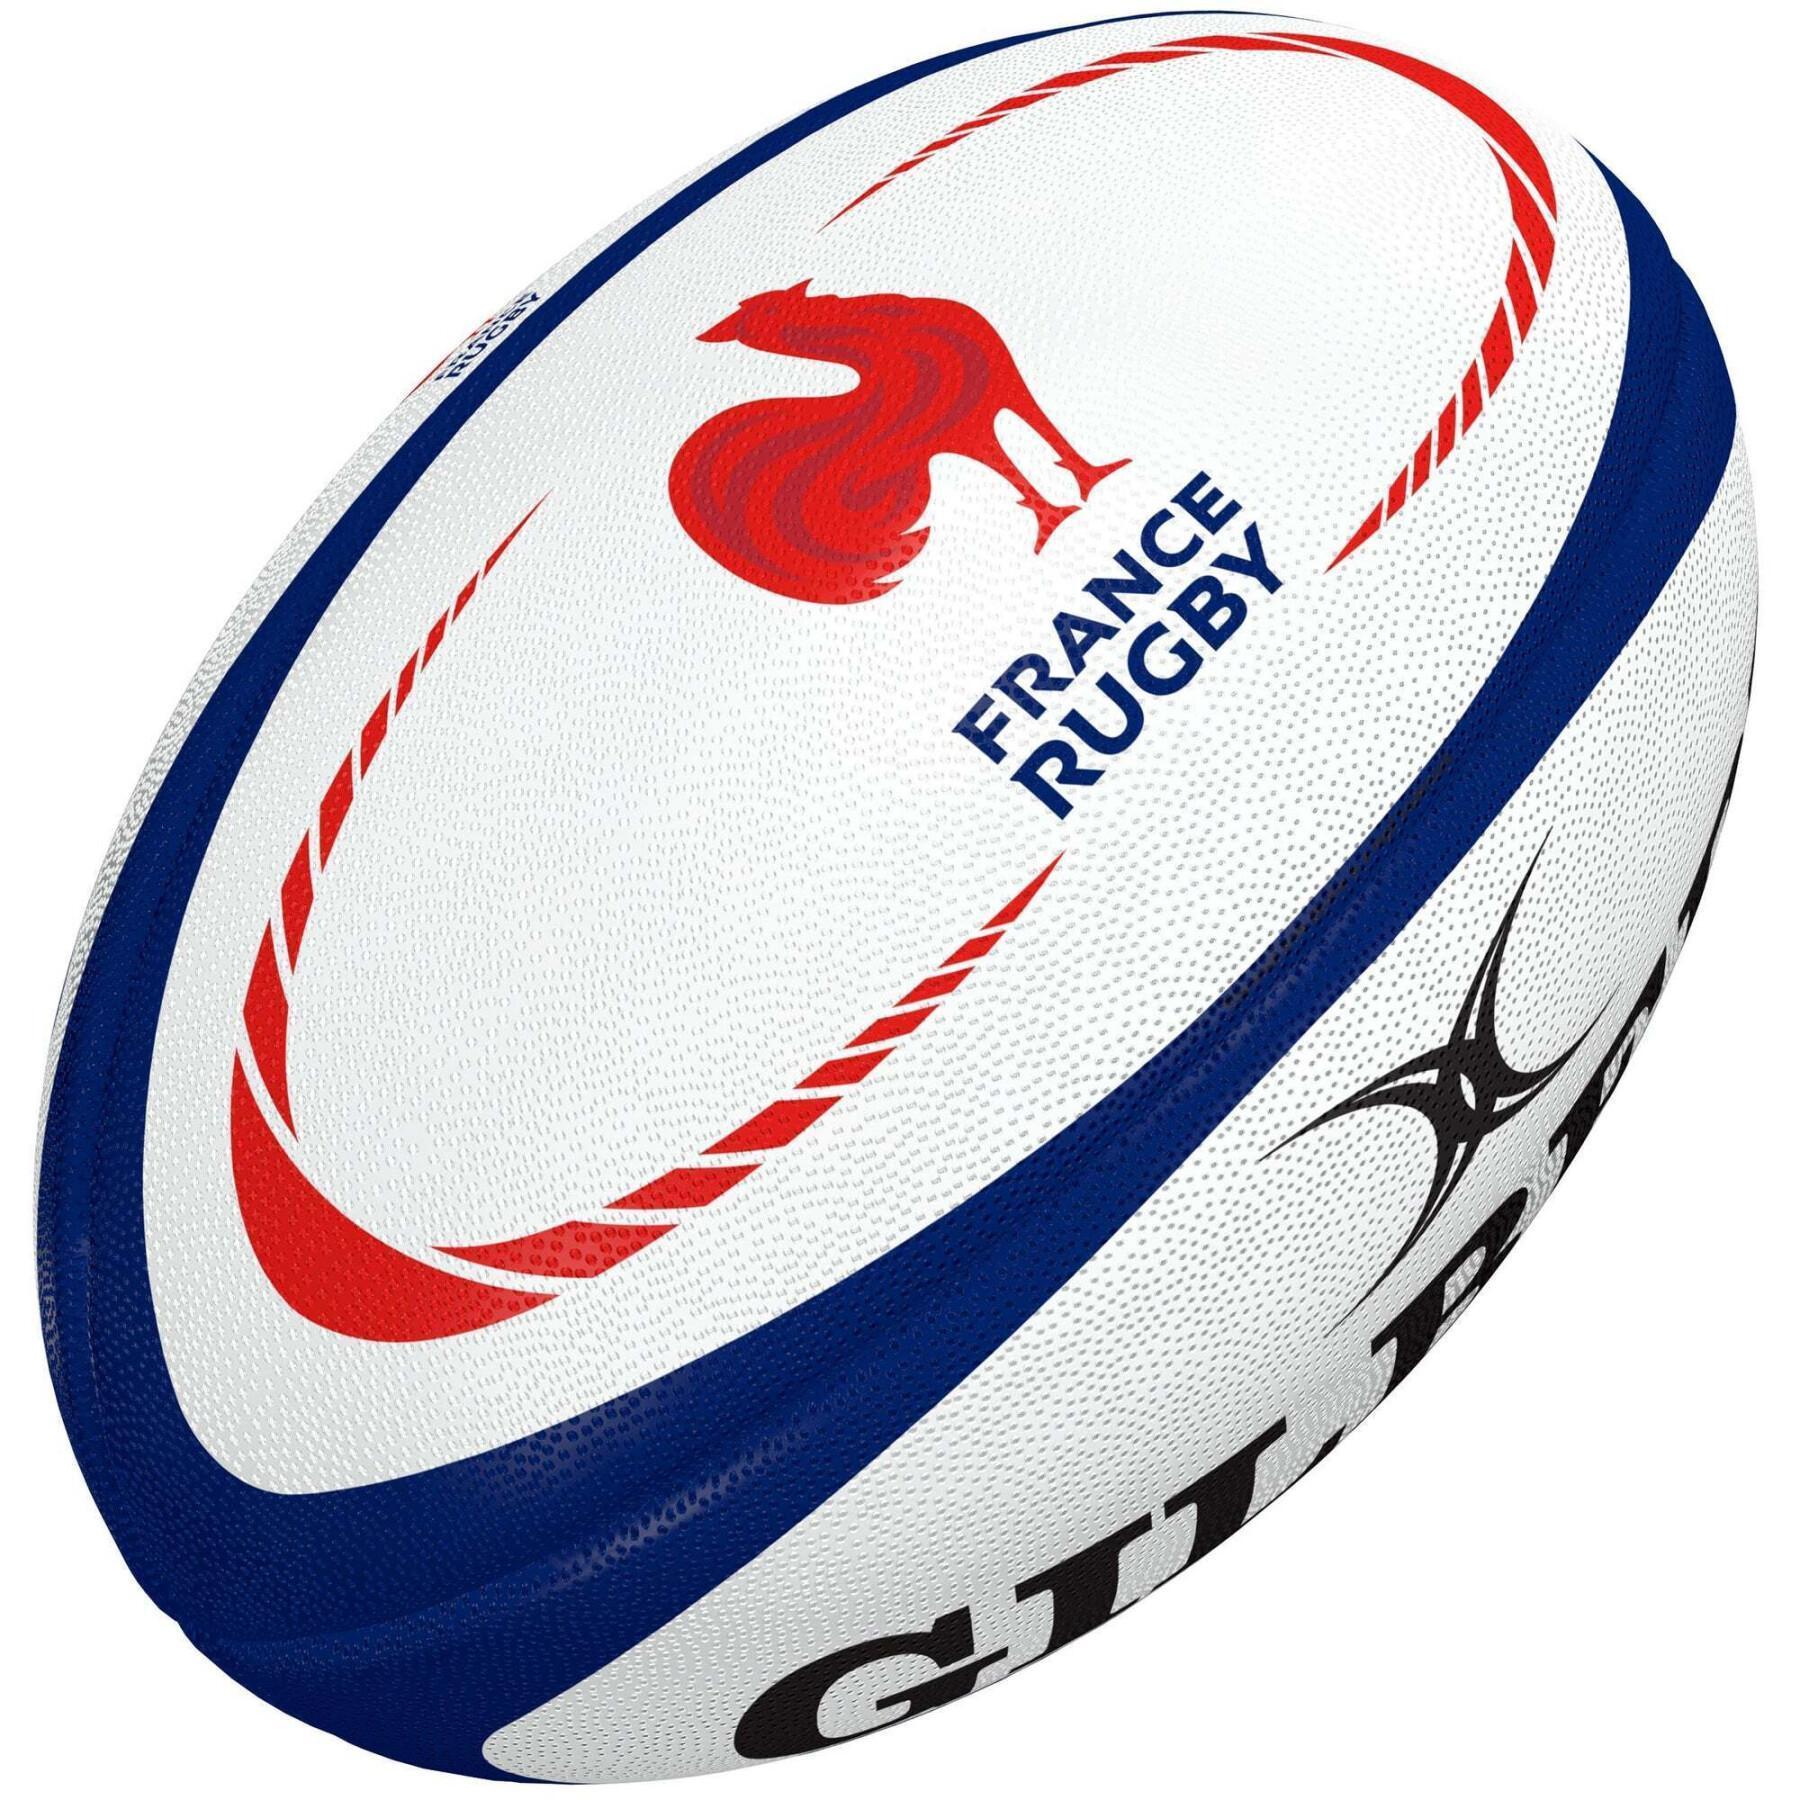 Pack of 12 rugby balls France Dangle